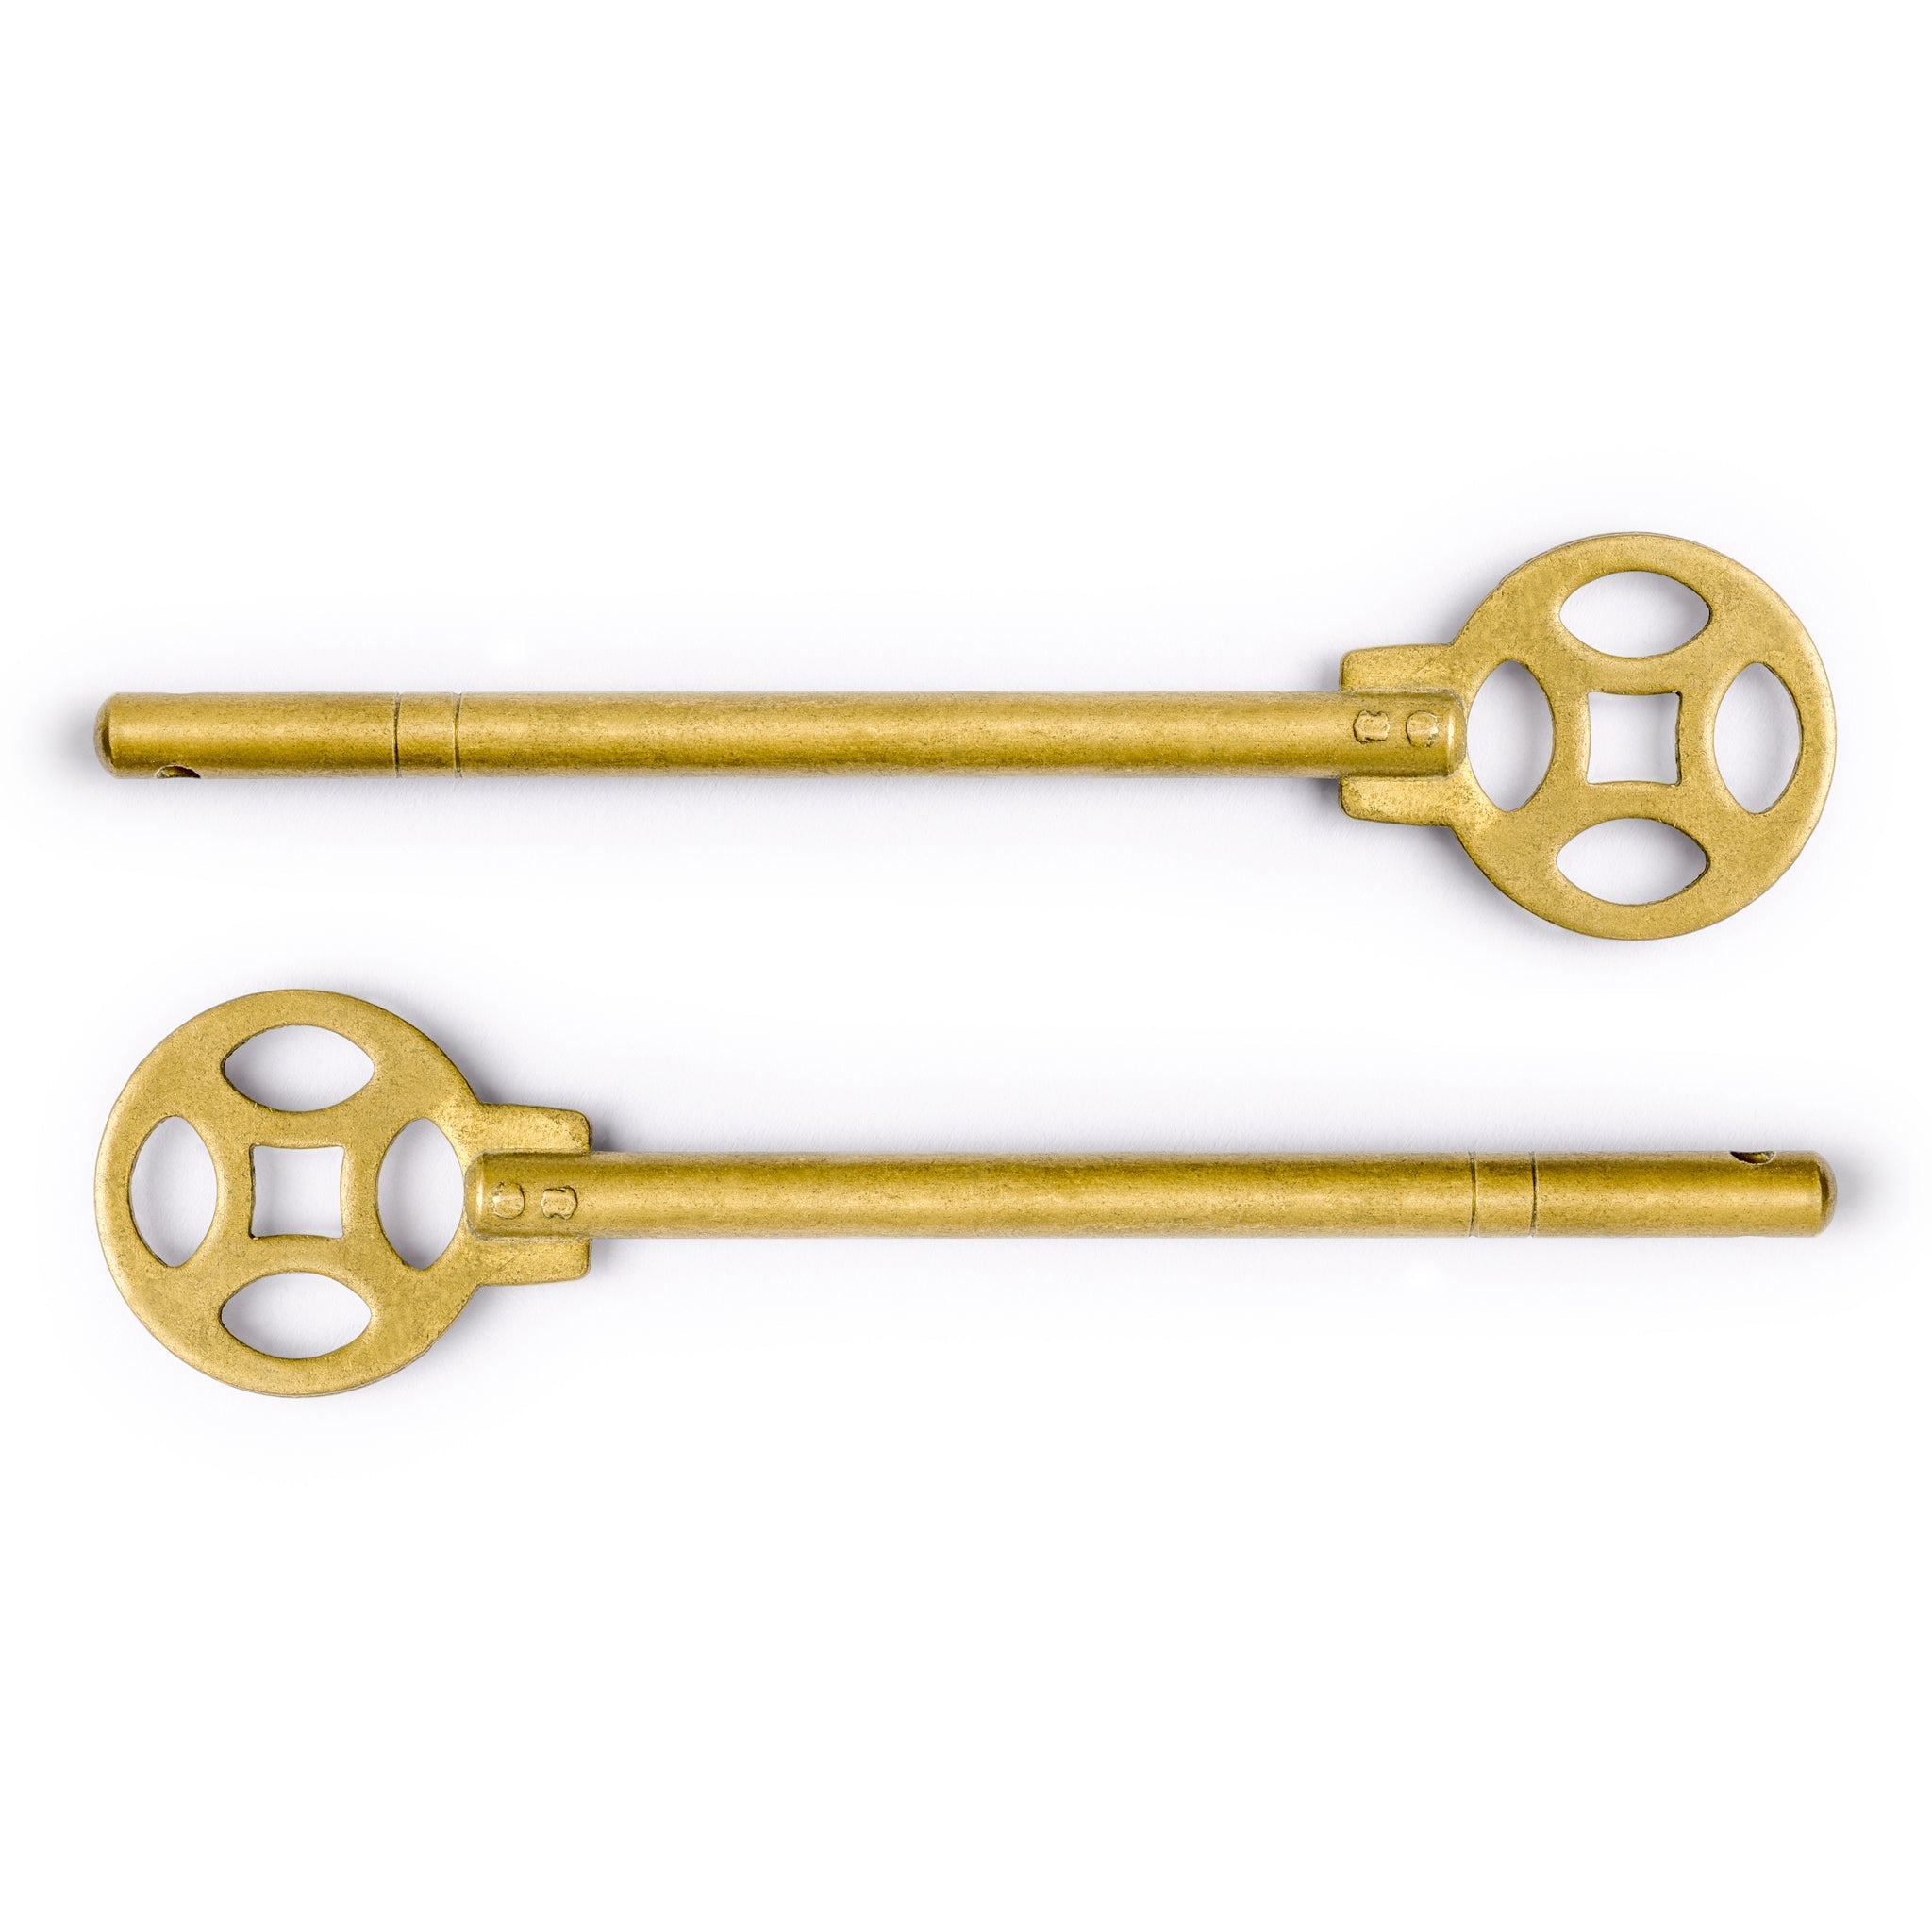 Money Coin Key 4.5" - Set of 2-Chinese Brass Hardware